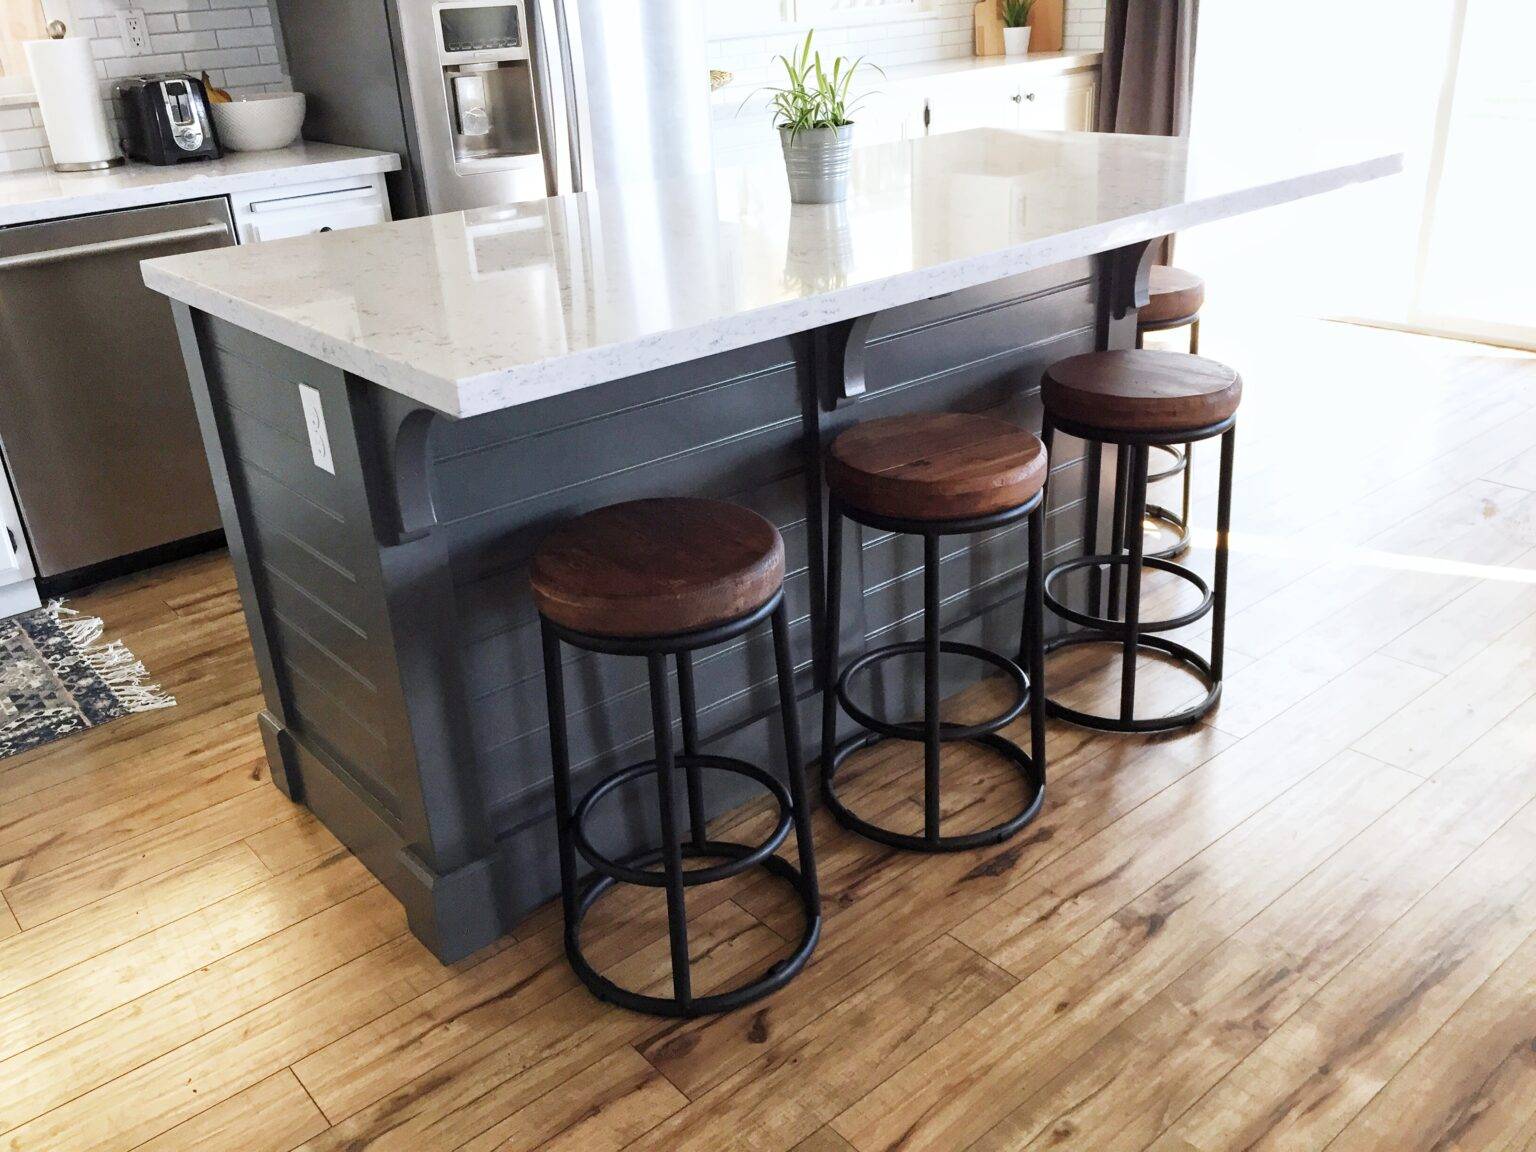 Diy Kitchen Islands To Transform Your Space, How Much Space For Stools At Kitchen Island